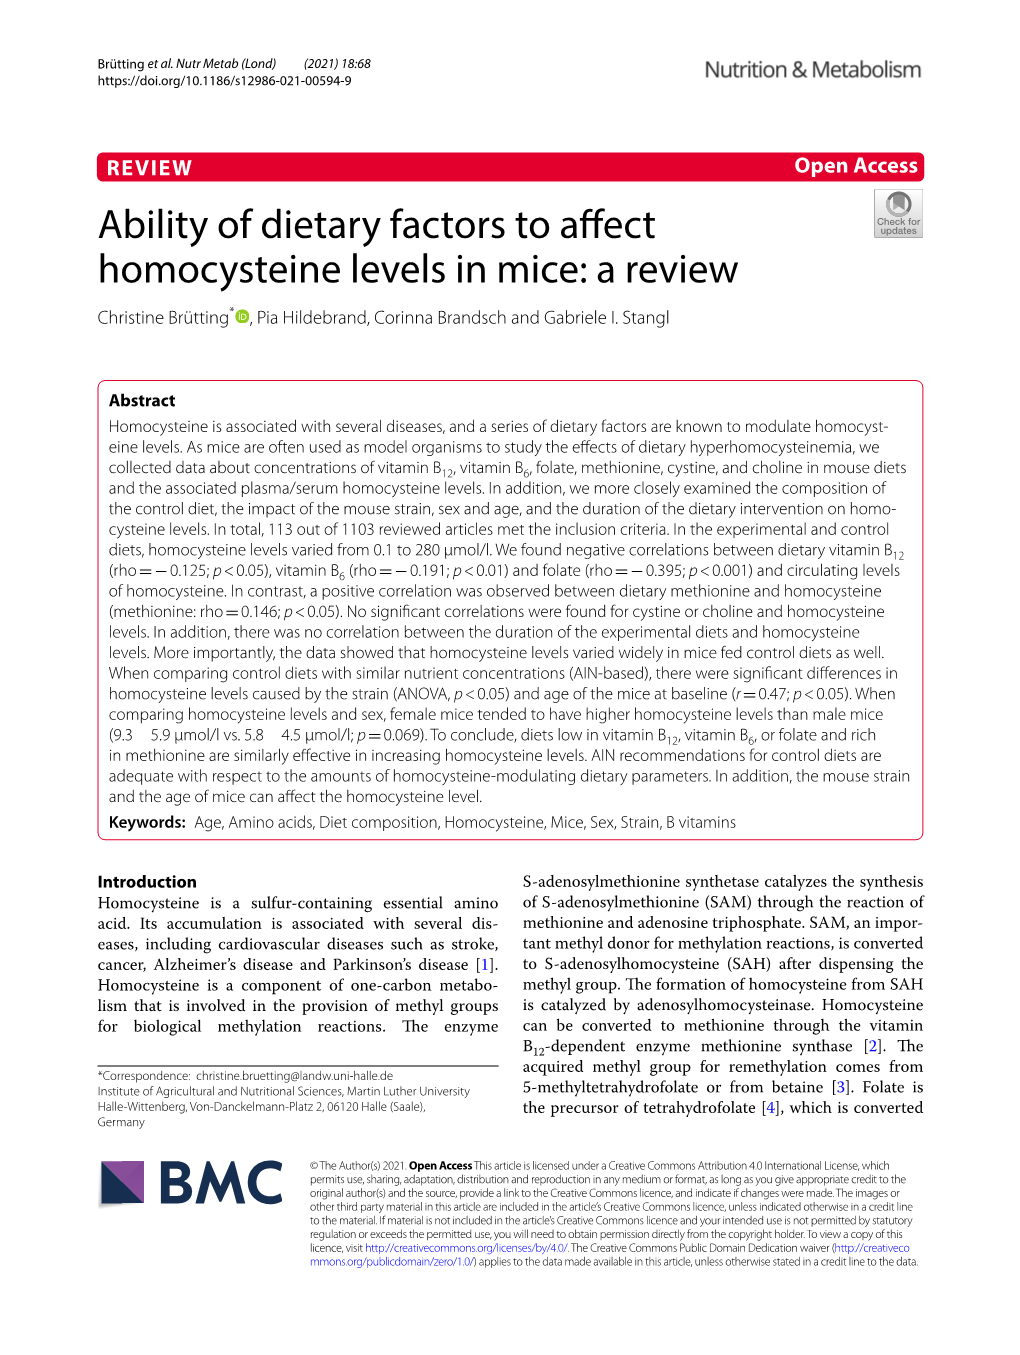 Ability of Dietary Factors to Affect Homocysteine Levels in Mice: a Review